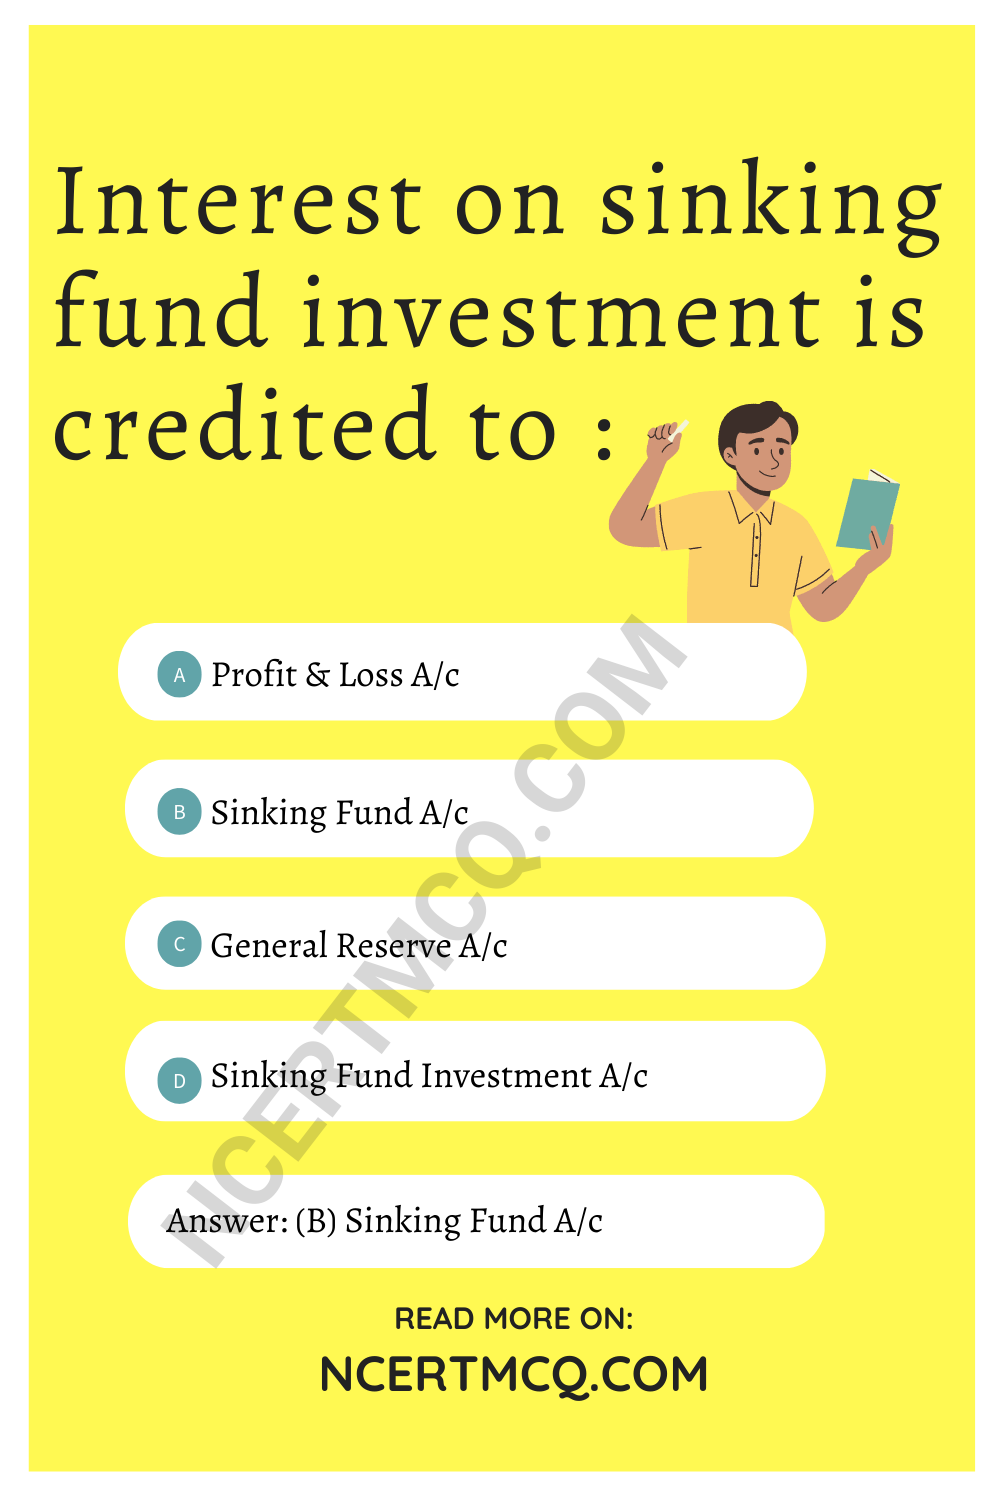 Interest on sinking fund investment is credited to :